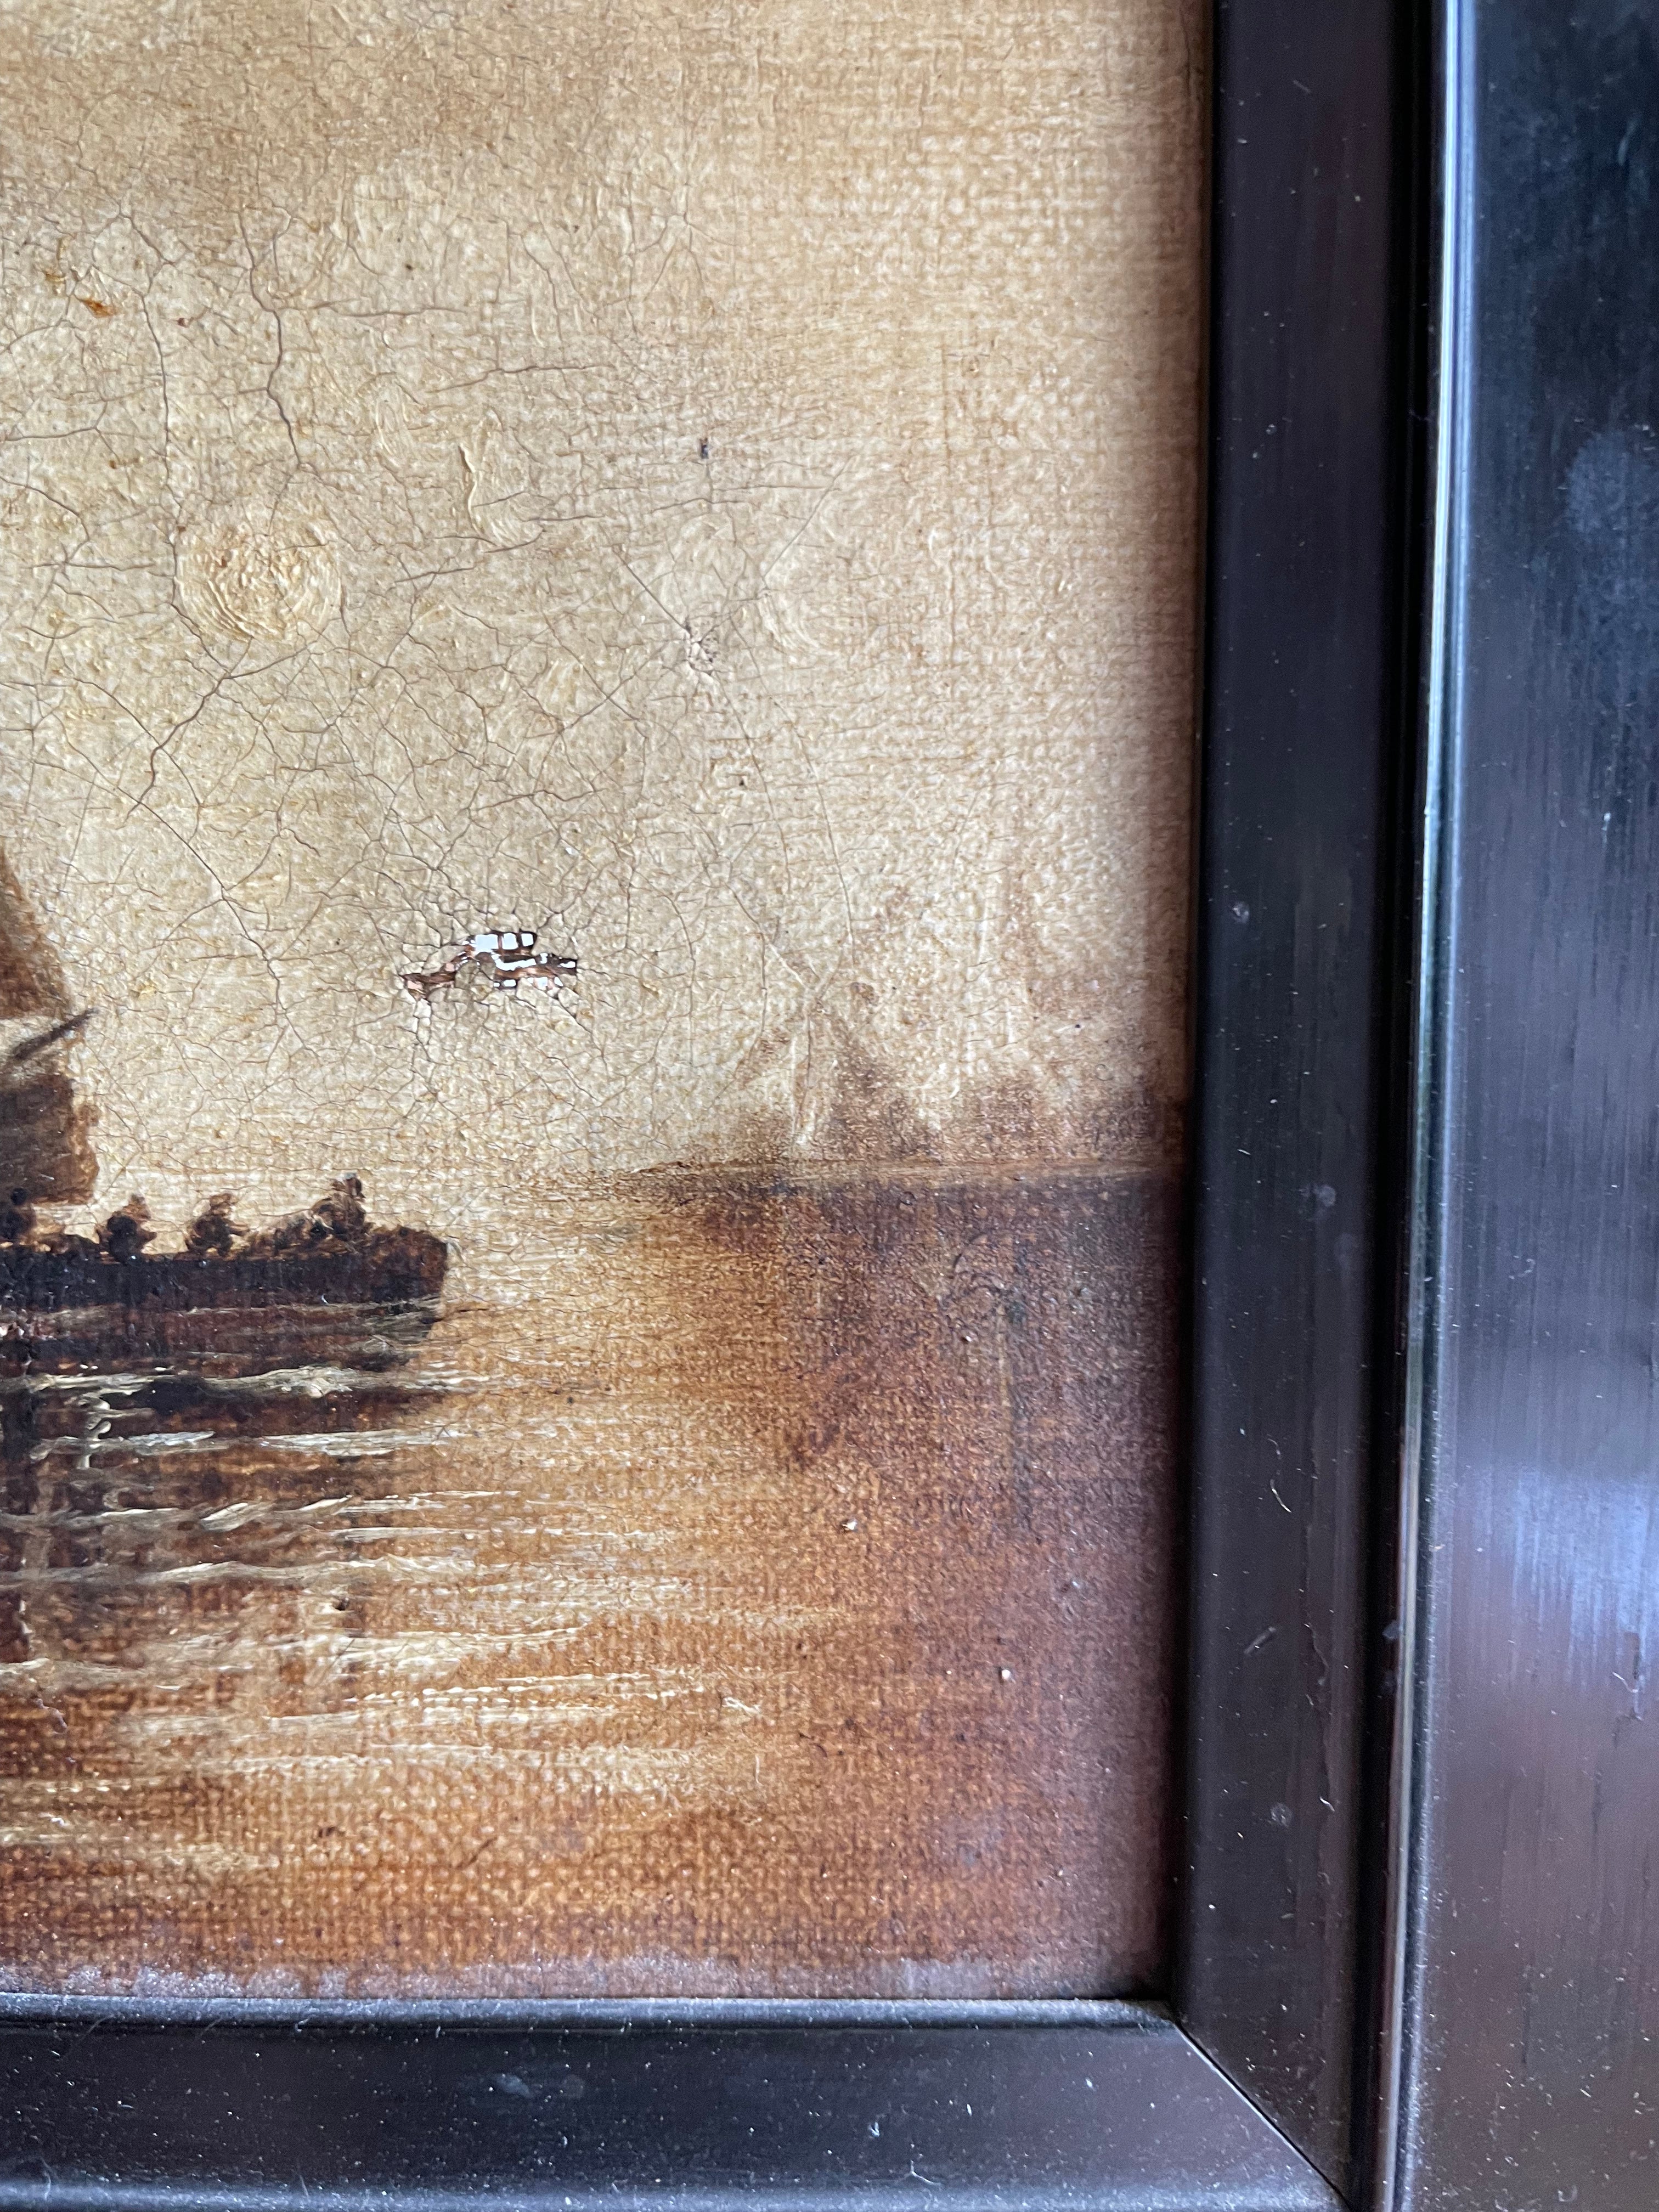 Antique Dutch Oil Painting with Sailing Boat